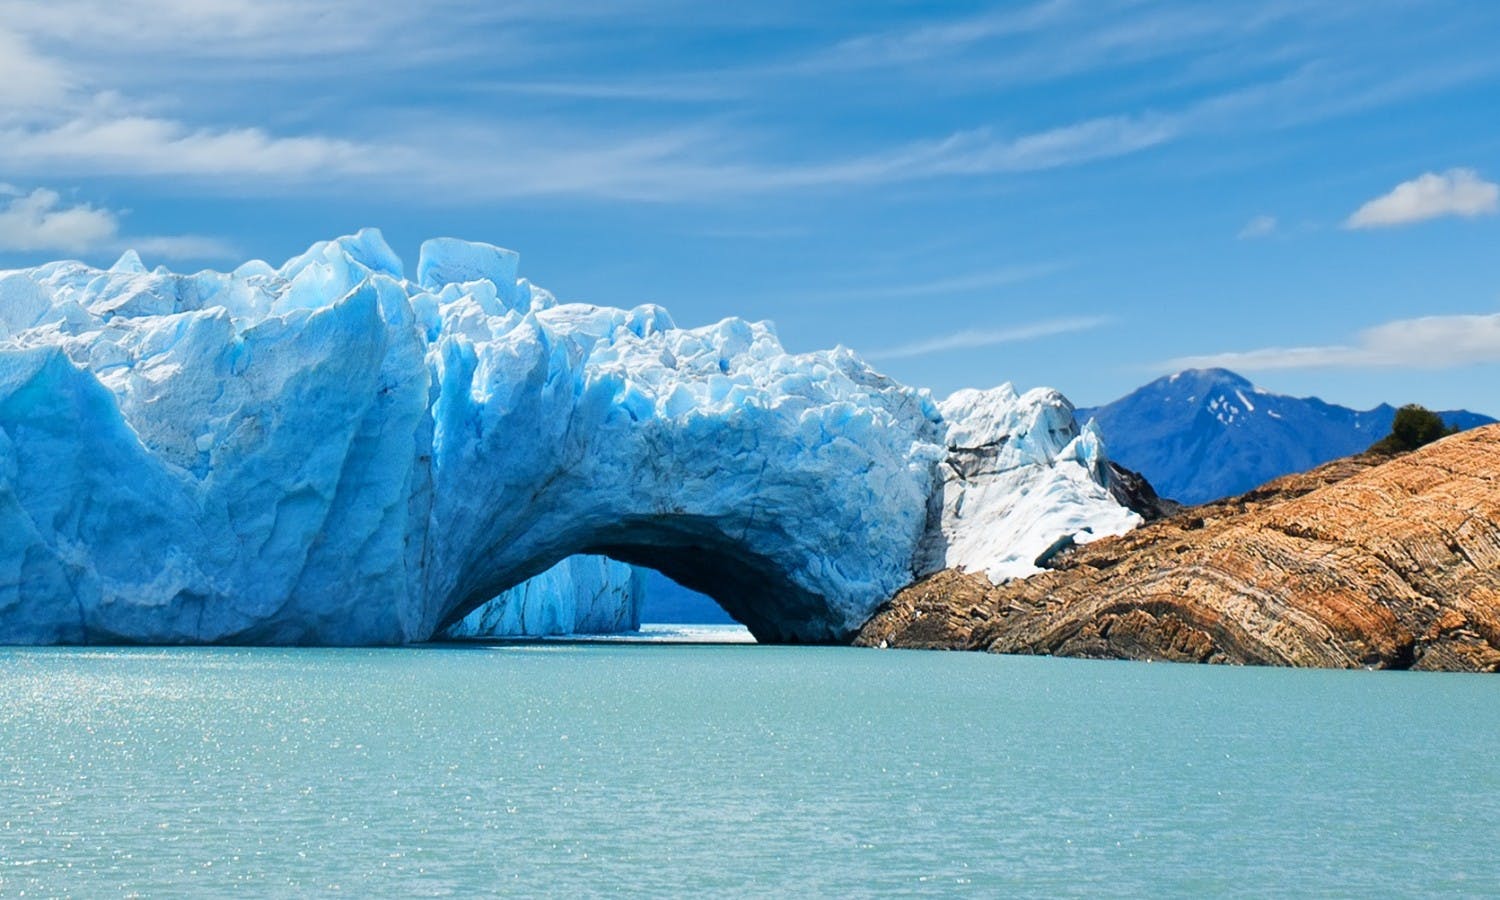 8 things to do in El Calafate, Argentina